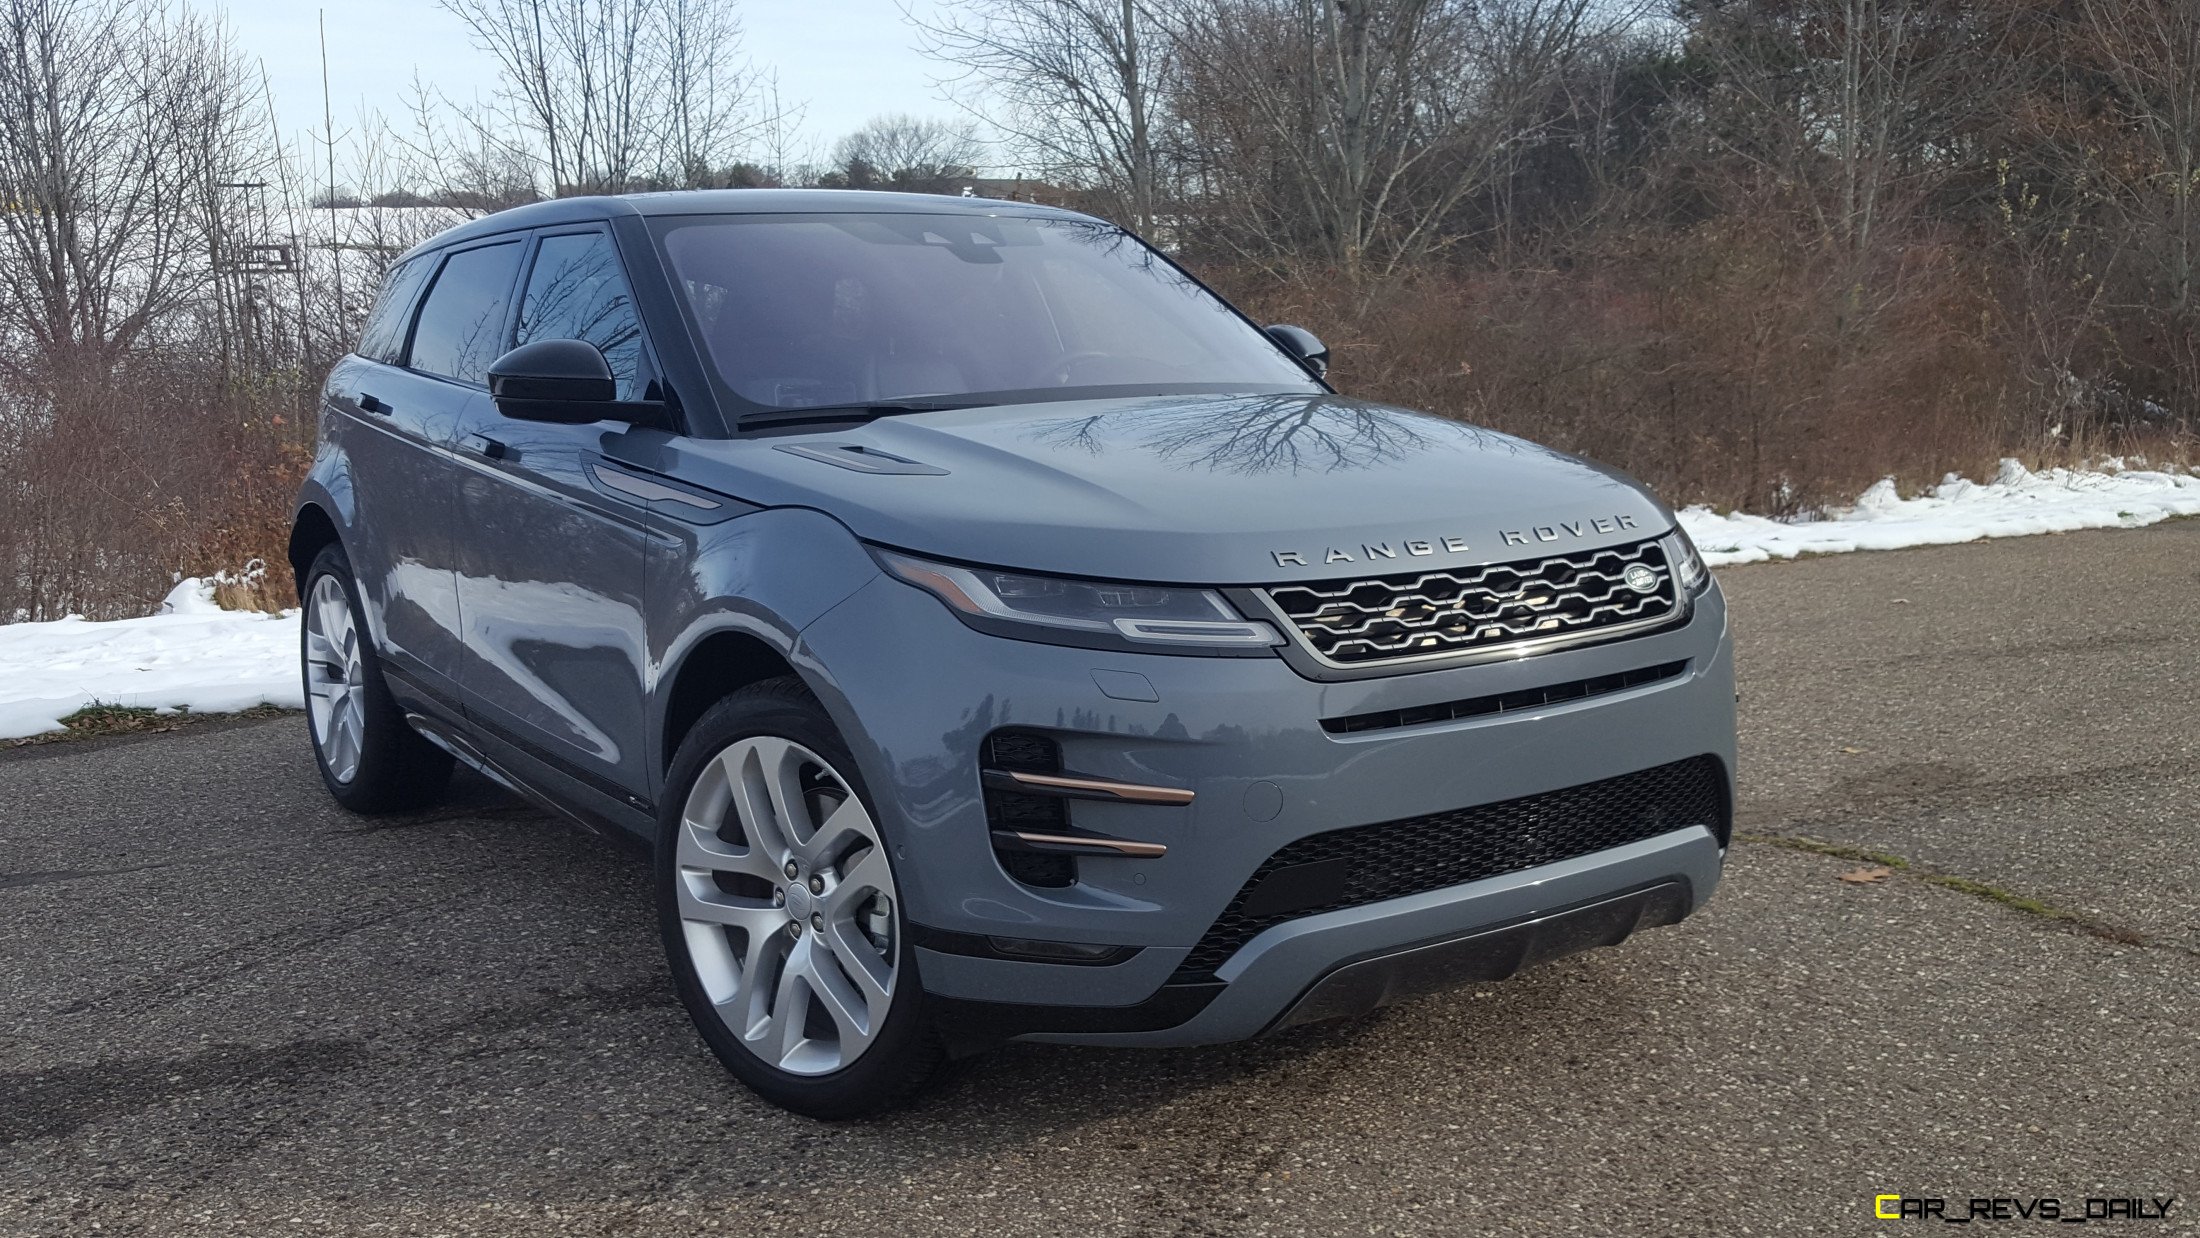 Range Rover Evoque 2020 Grey  - The Evoque Solidifies Its Place As The Range Rover Of Its Segment.